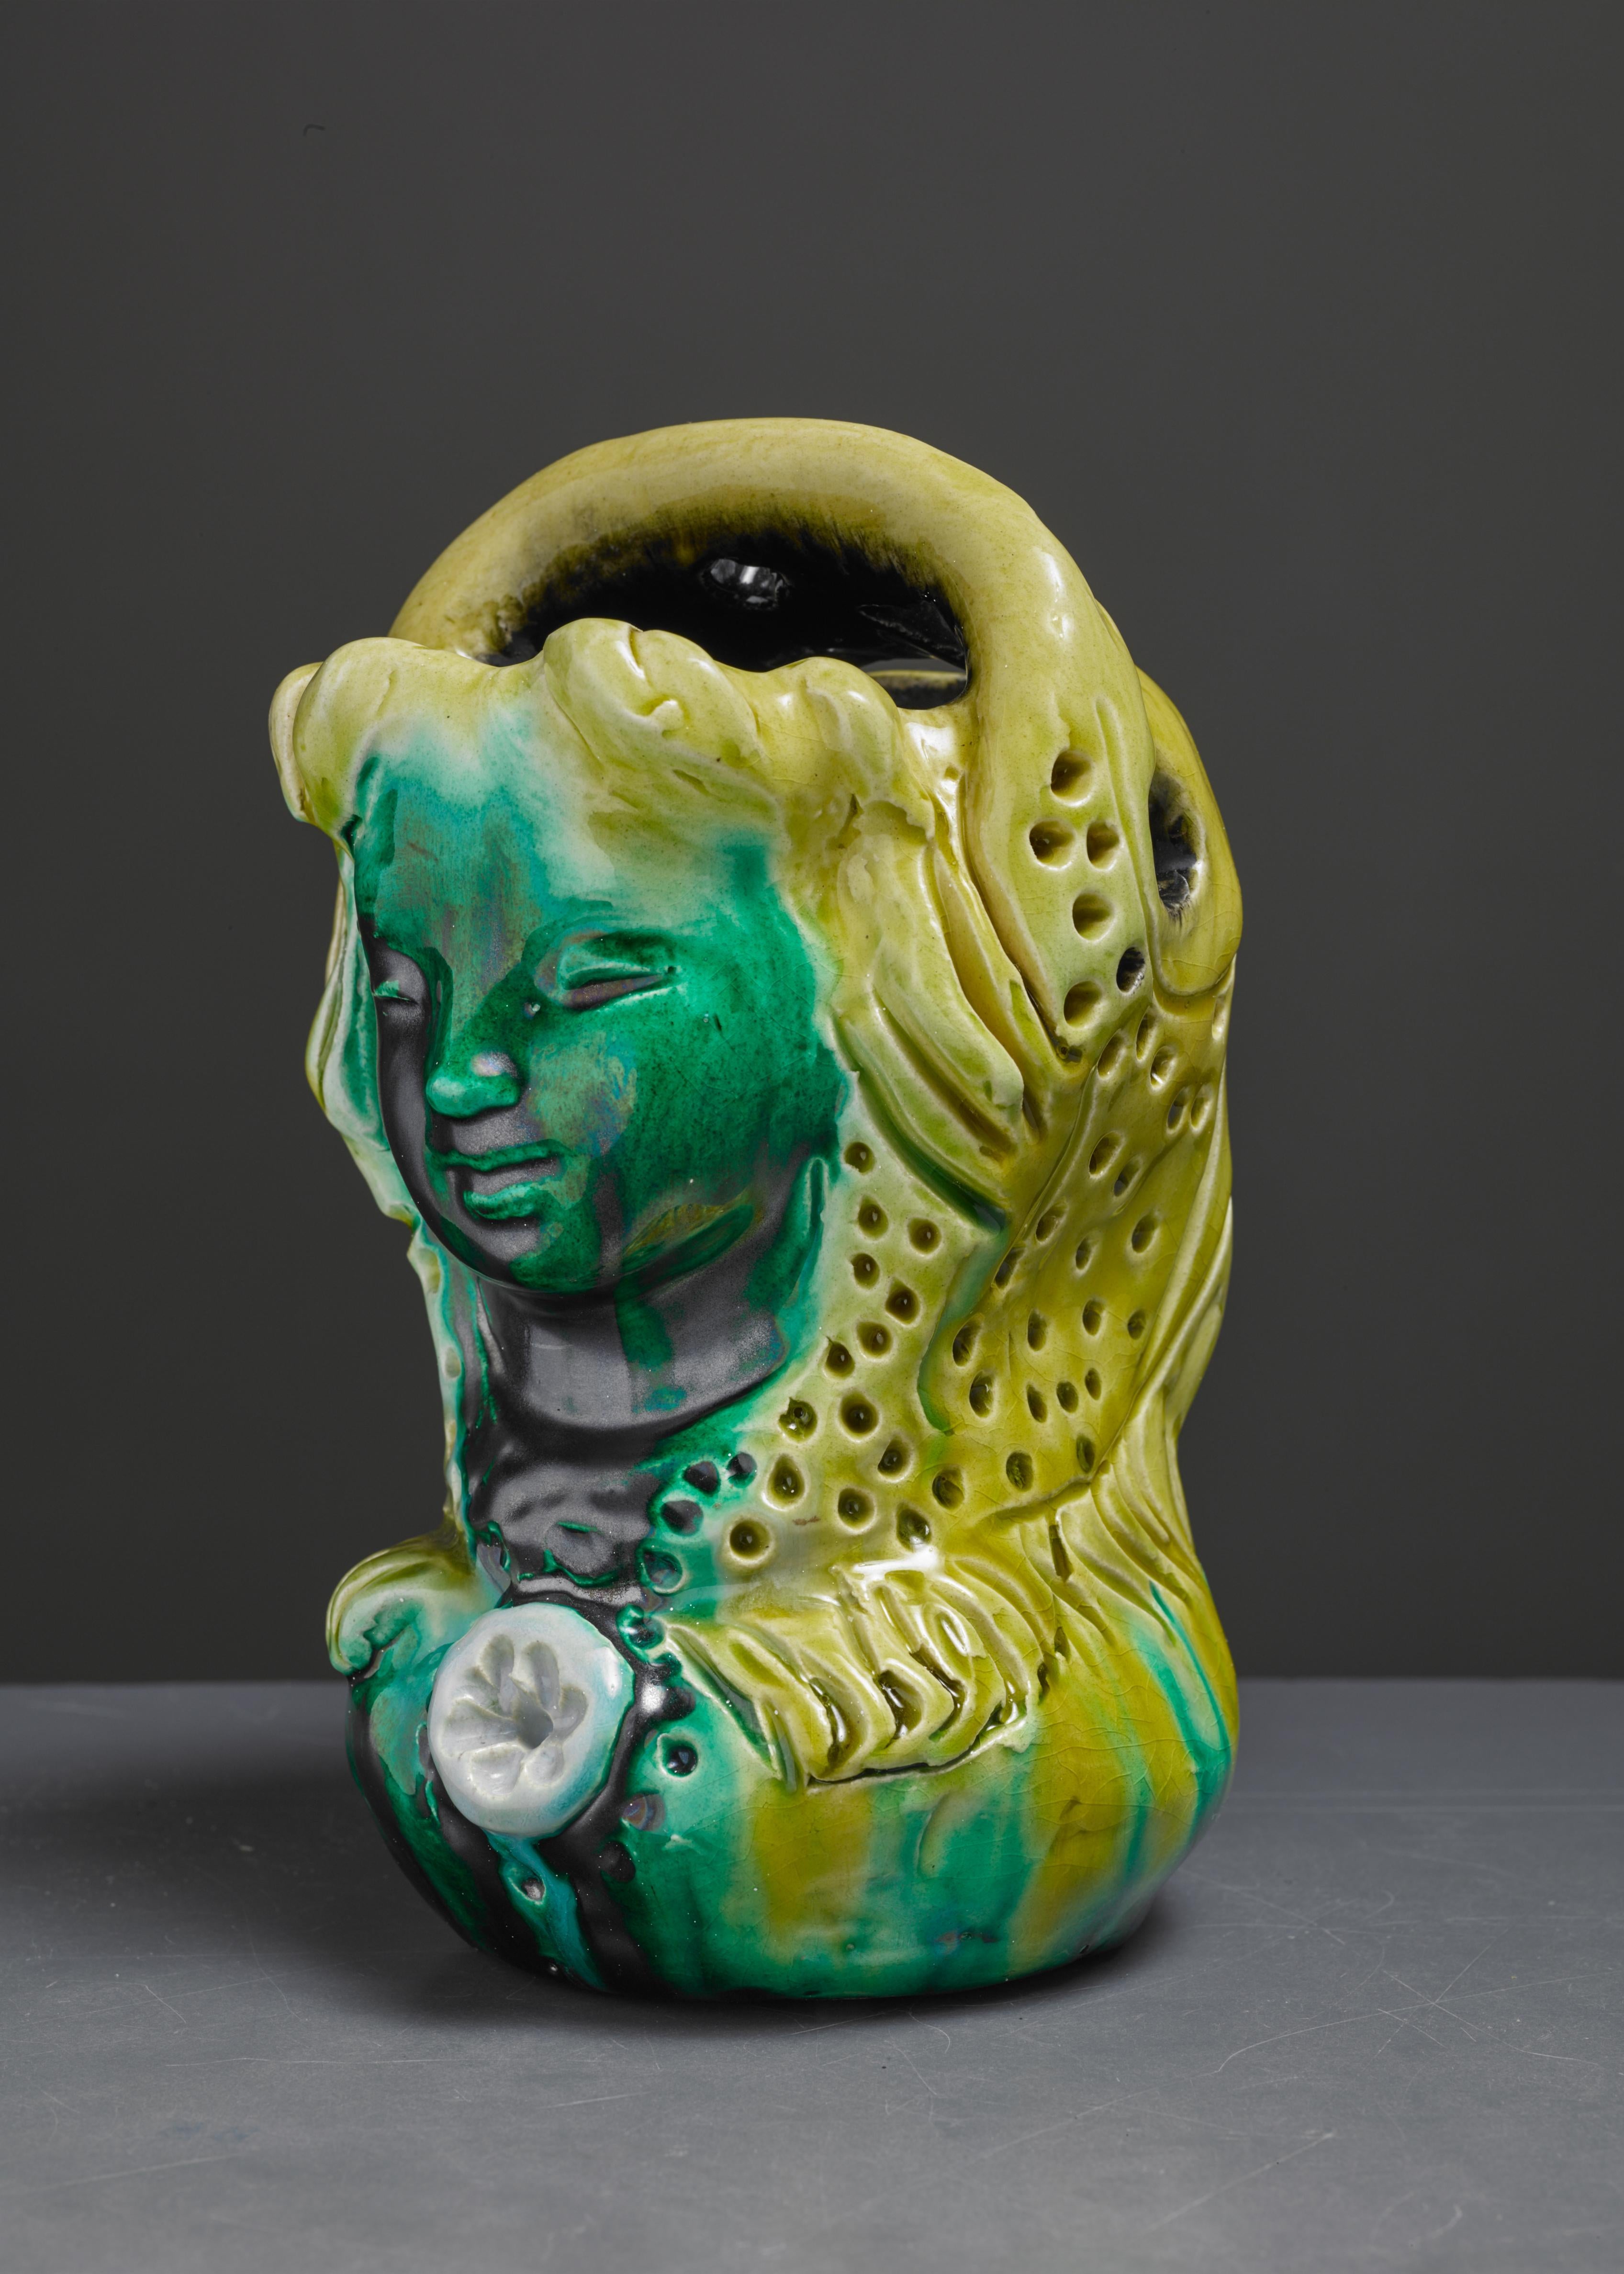 A wonderful ceramic vase of a Madonna's face, with stunning yellow and green colours. In a style reminiscent of George Jouve.